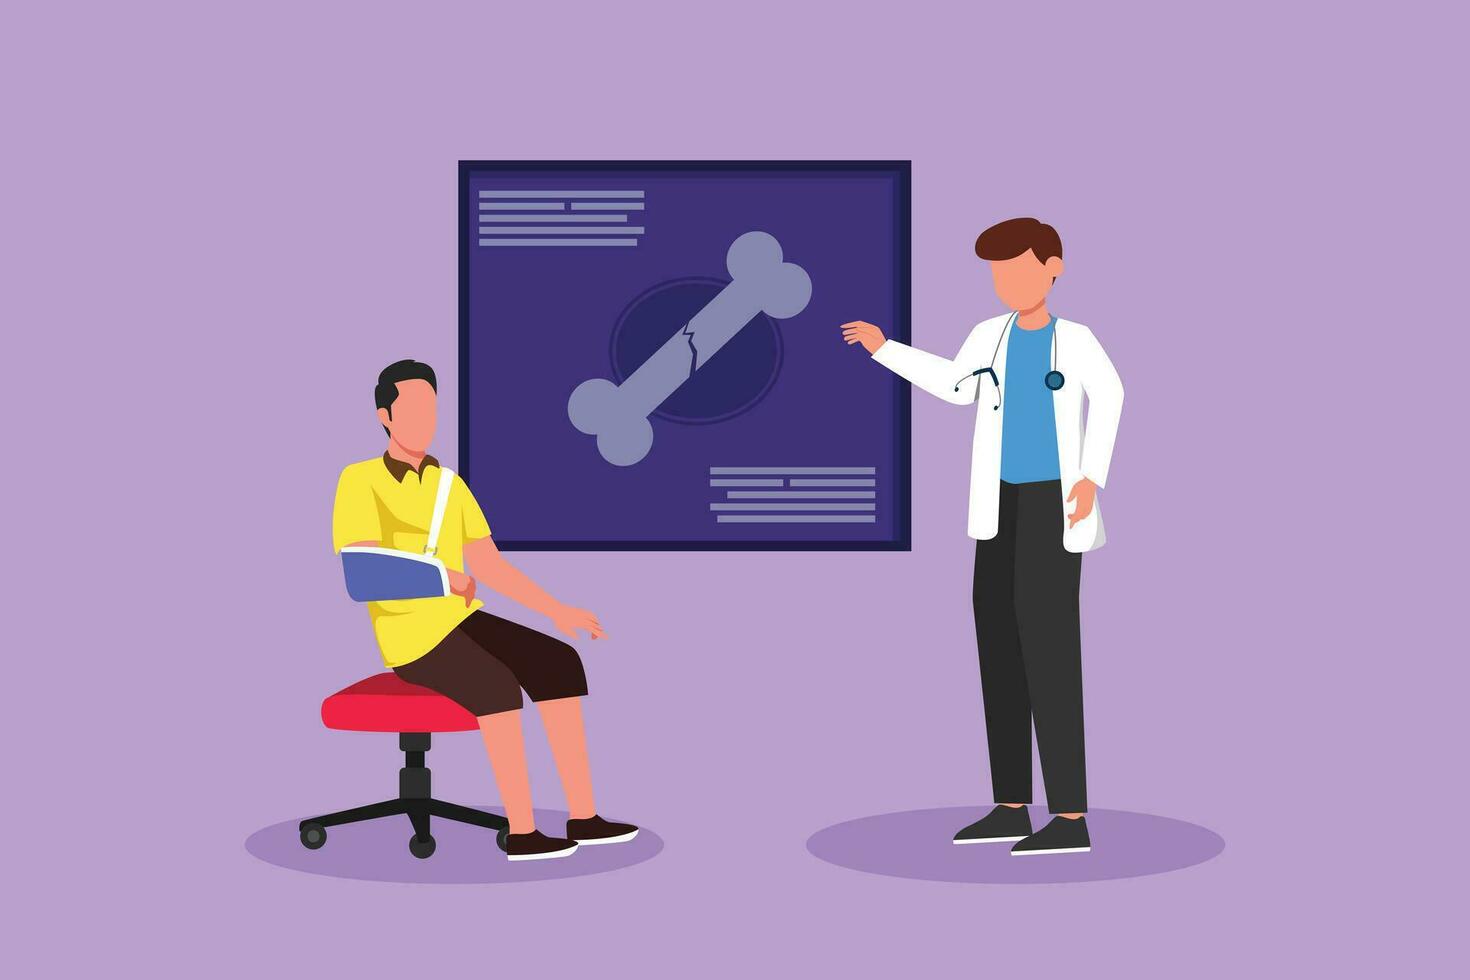 Cartoon flat style drawing medical doctor showing x-ray picture with limb fracture to male patient with broken arm photo. Healthcare, man with injured bandaged hand. Graphic design vector illustration